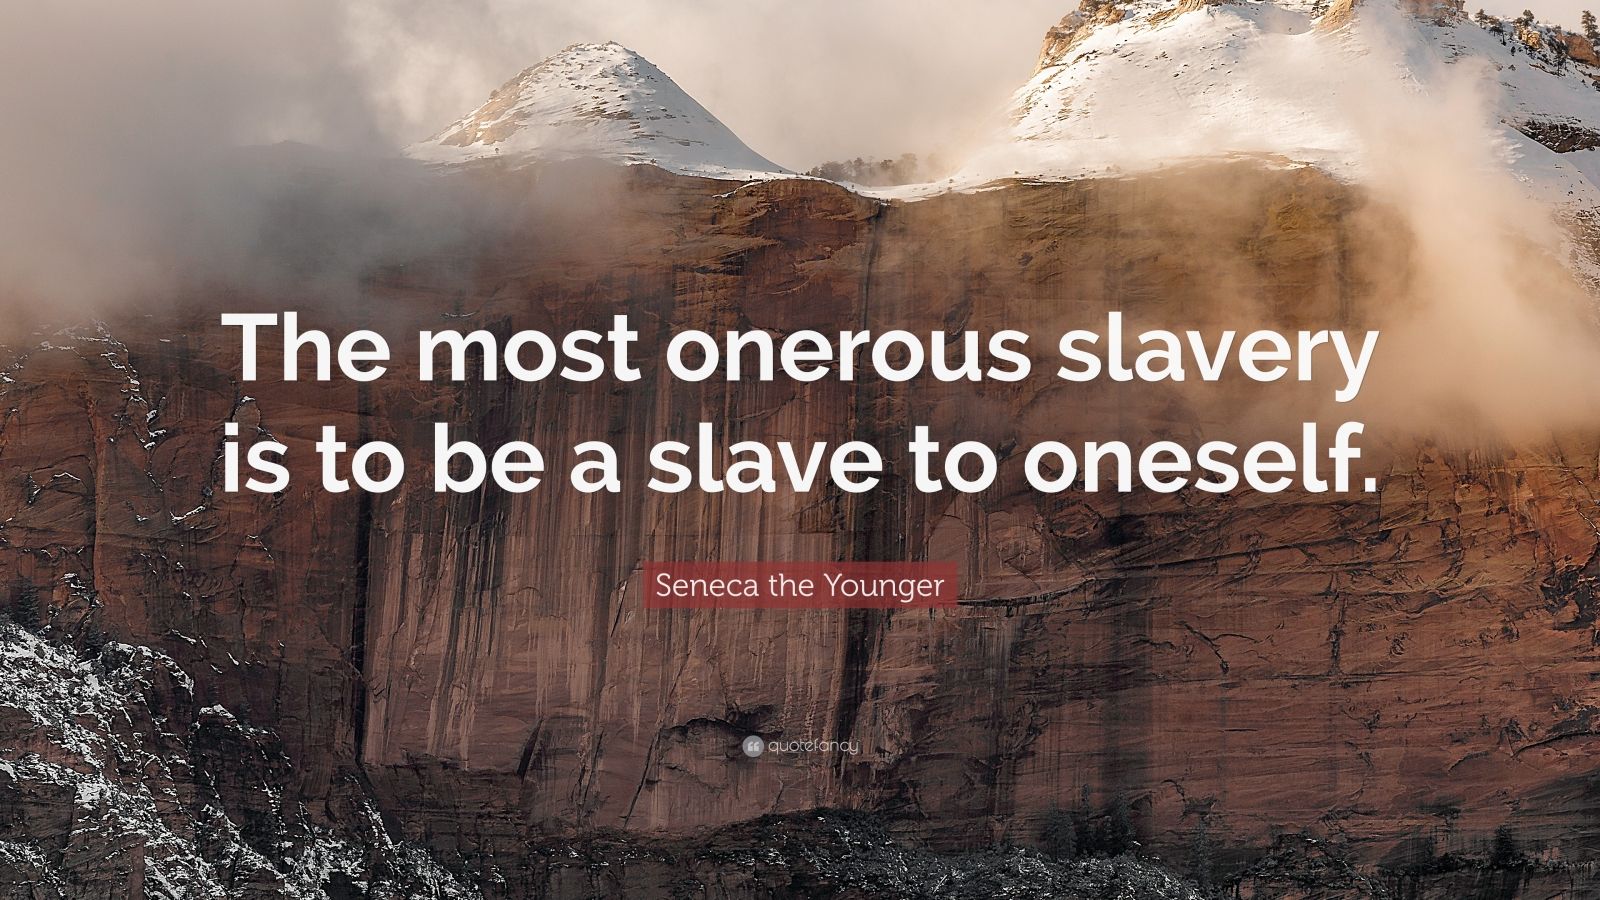 Seneca the Younger Quote: “The most onerous slavery is to be a slave to ...